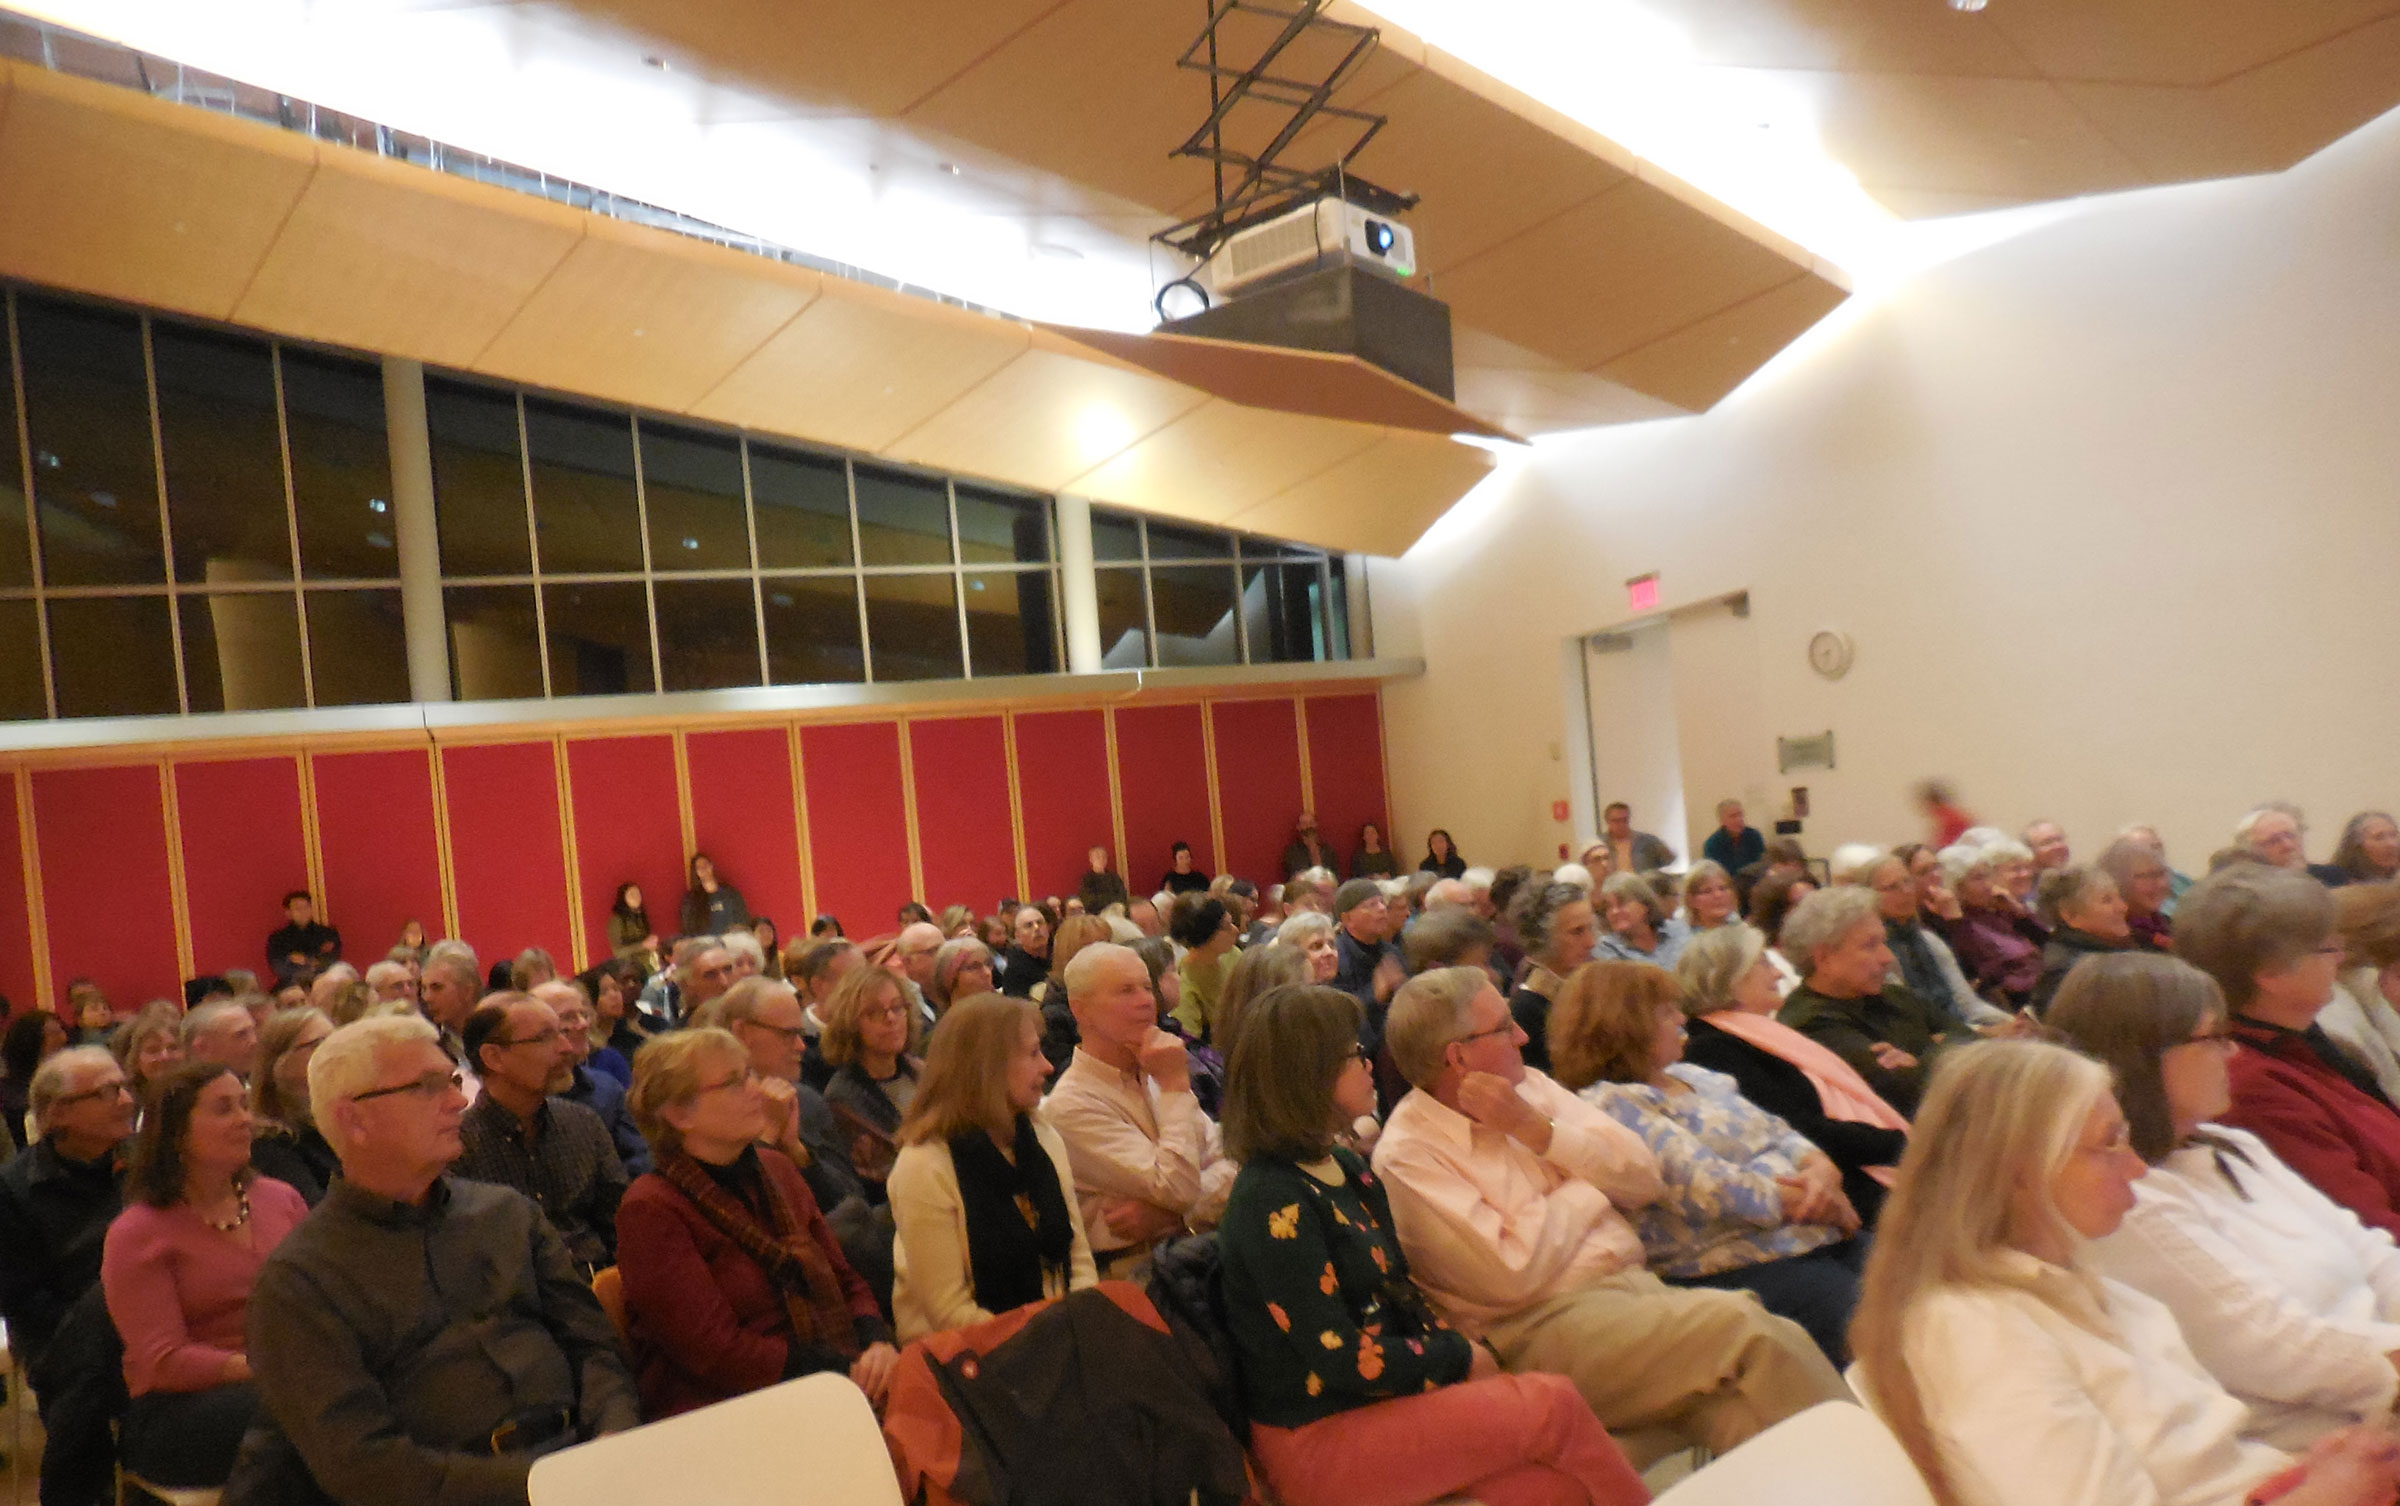 The audience at Smith College listened to the talk on "space for well-being"